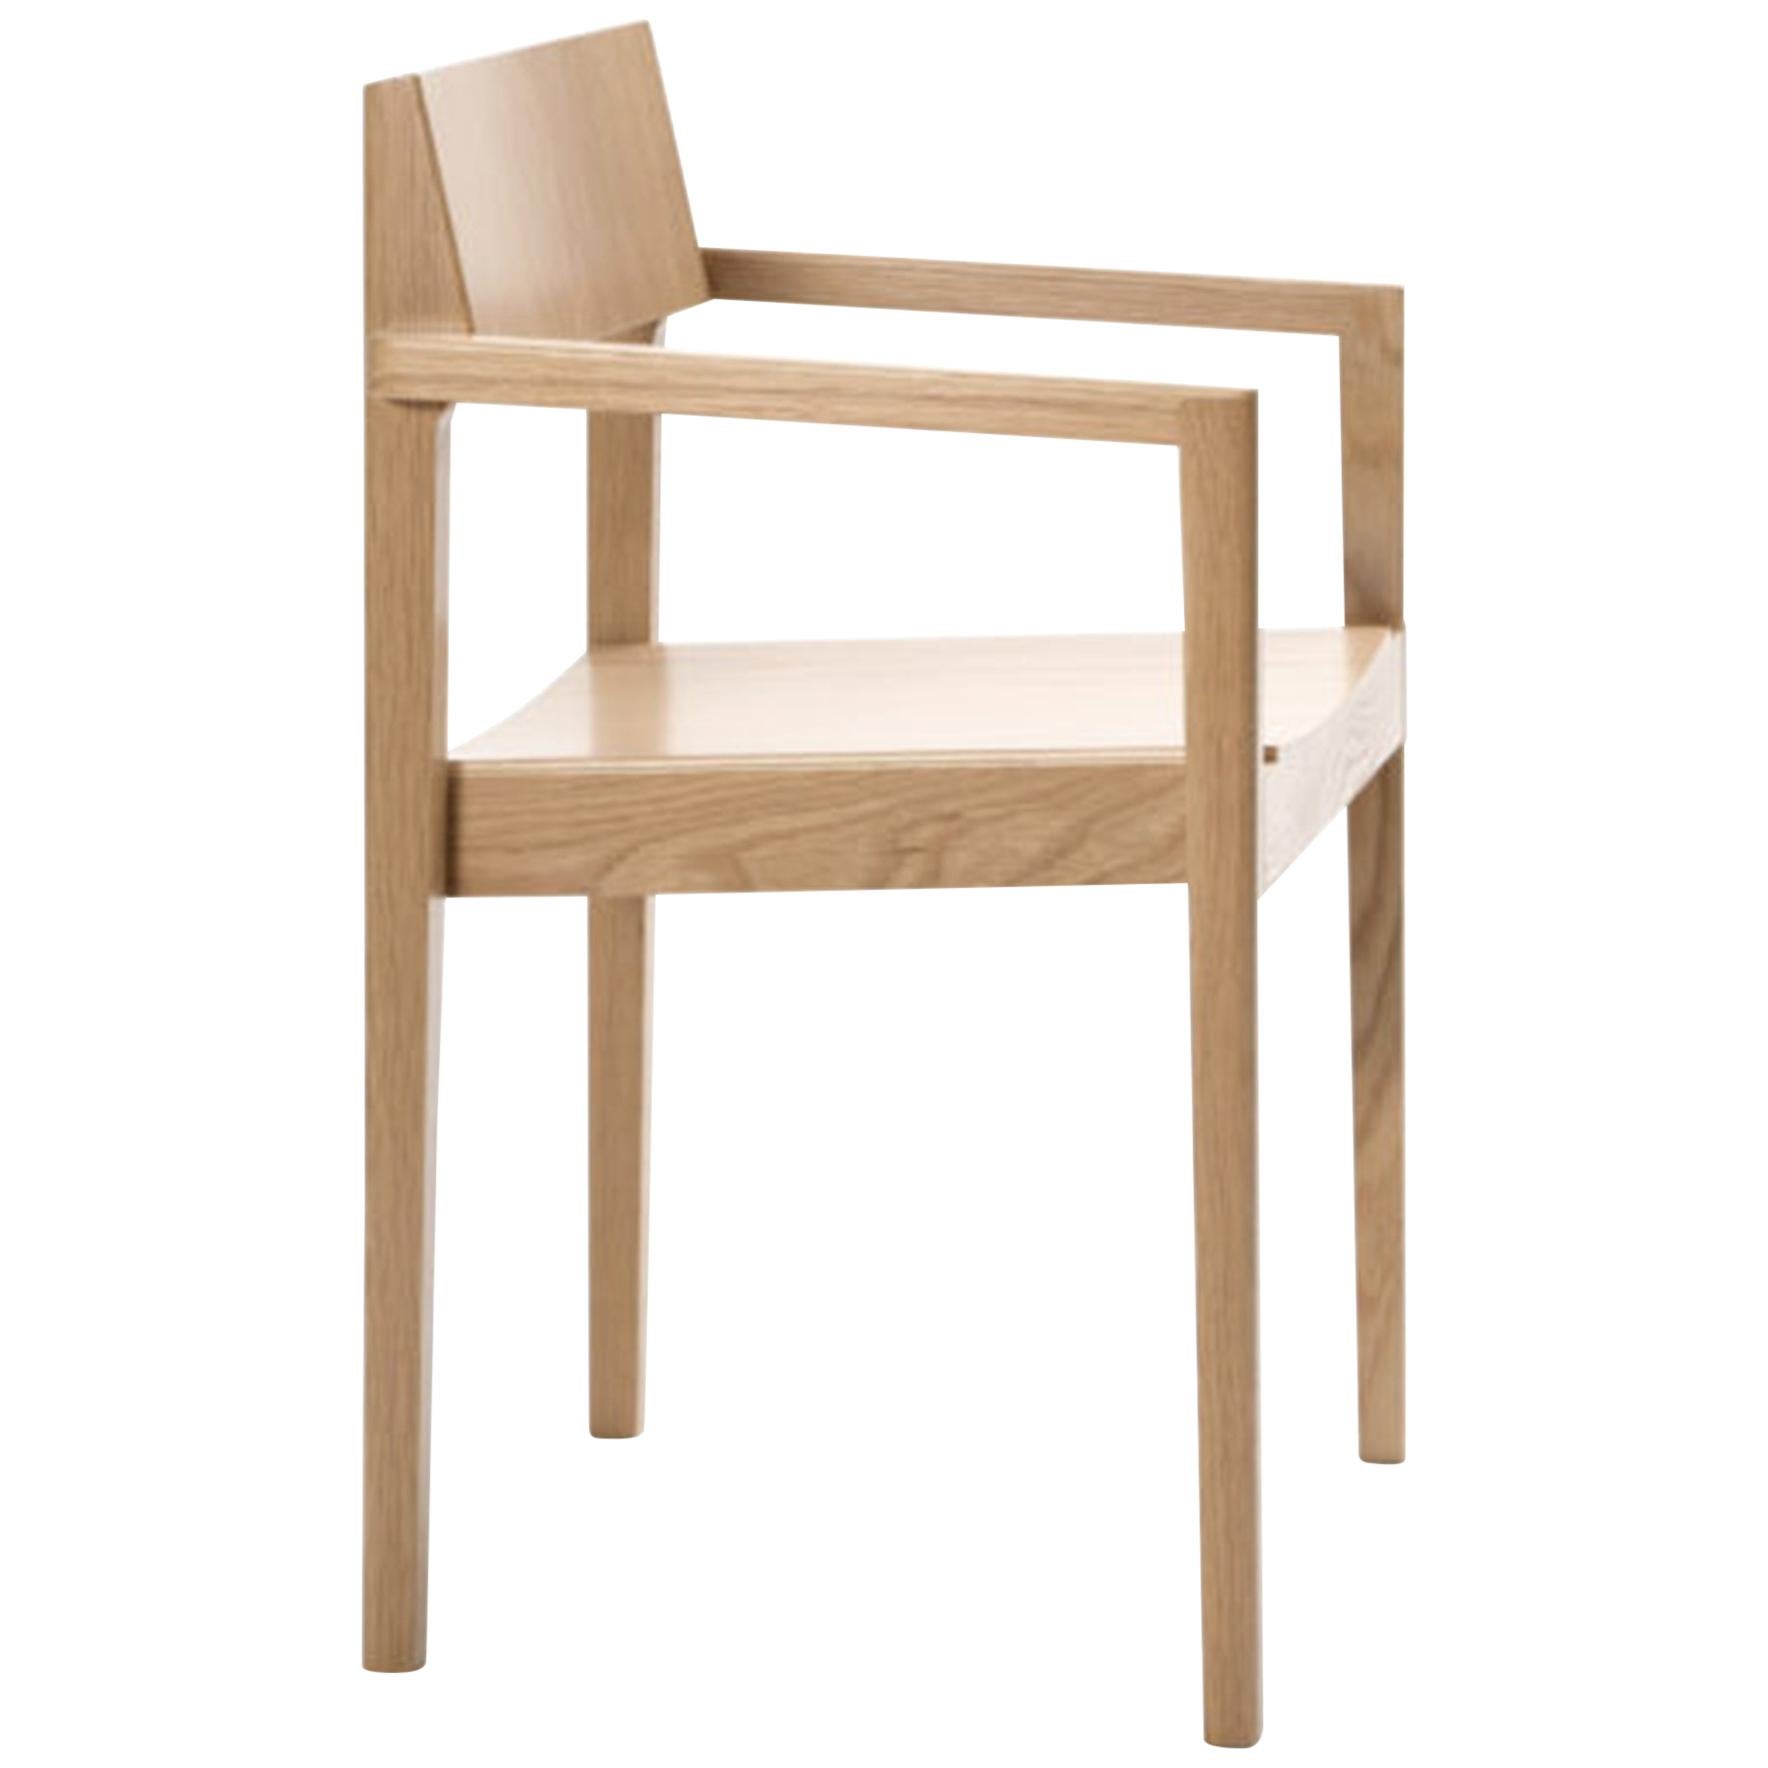 Customizable Inno Intro Stackable Wood Chair by Ari Kanerva For Sale